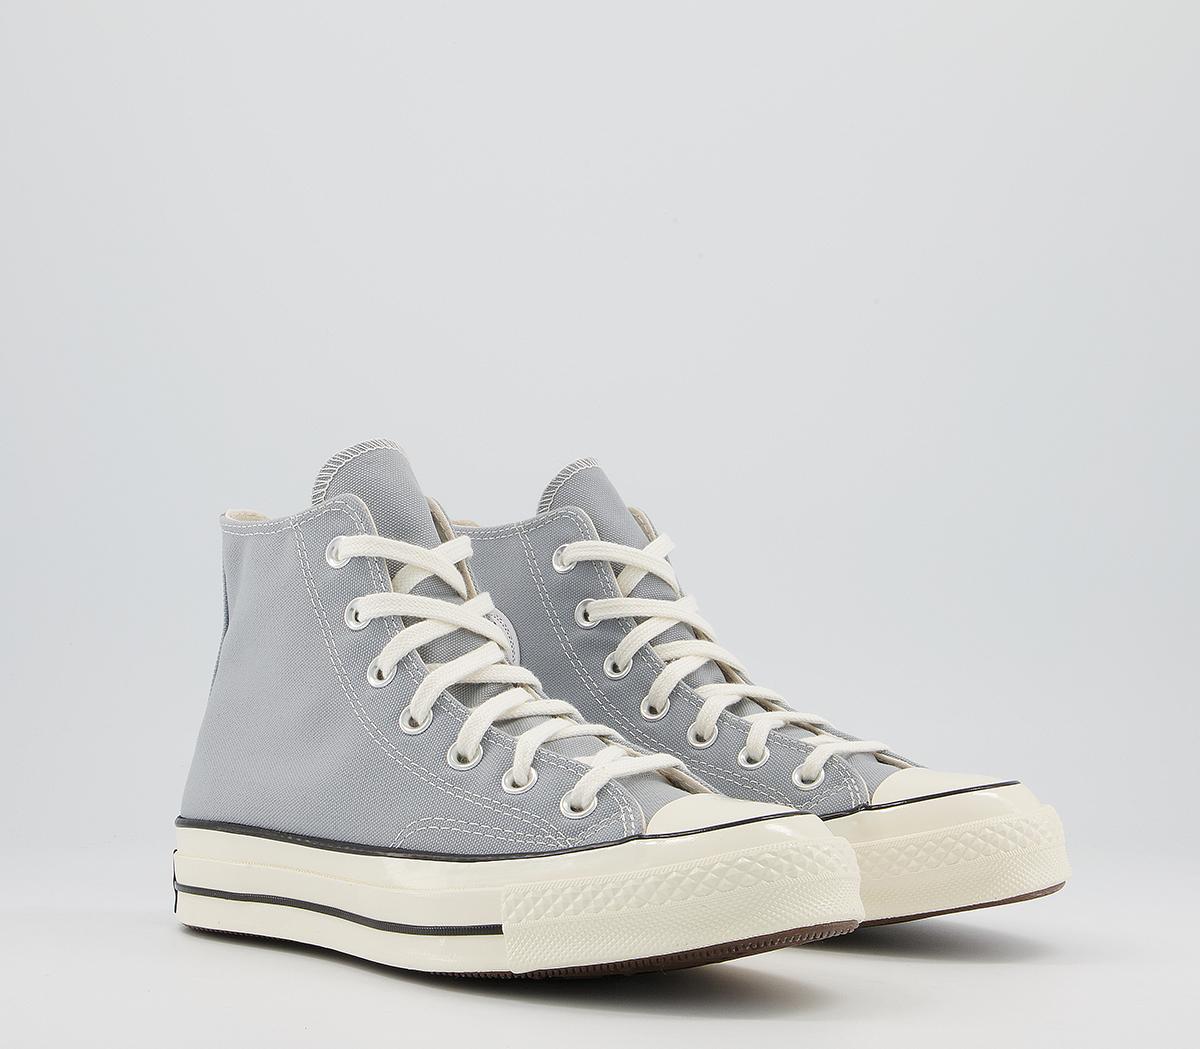 Converse All Star Hi 70s Trainers Grey - Women's Trainers